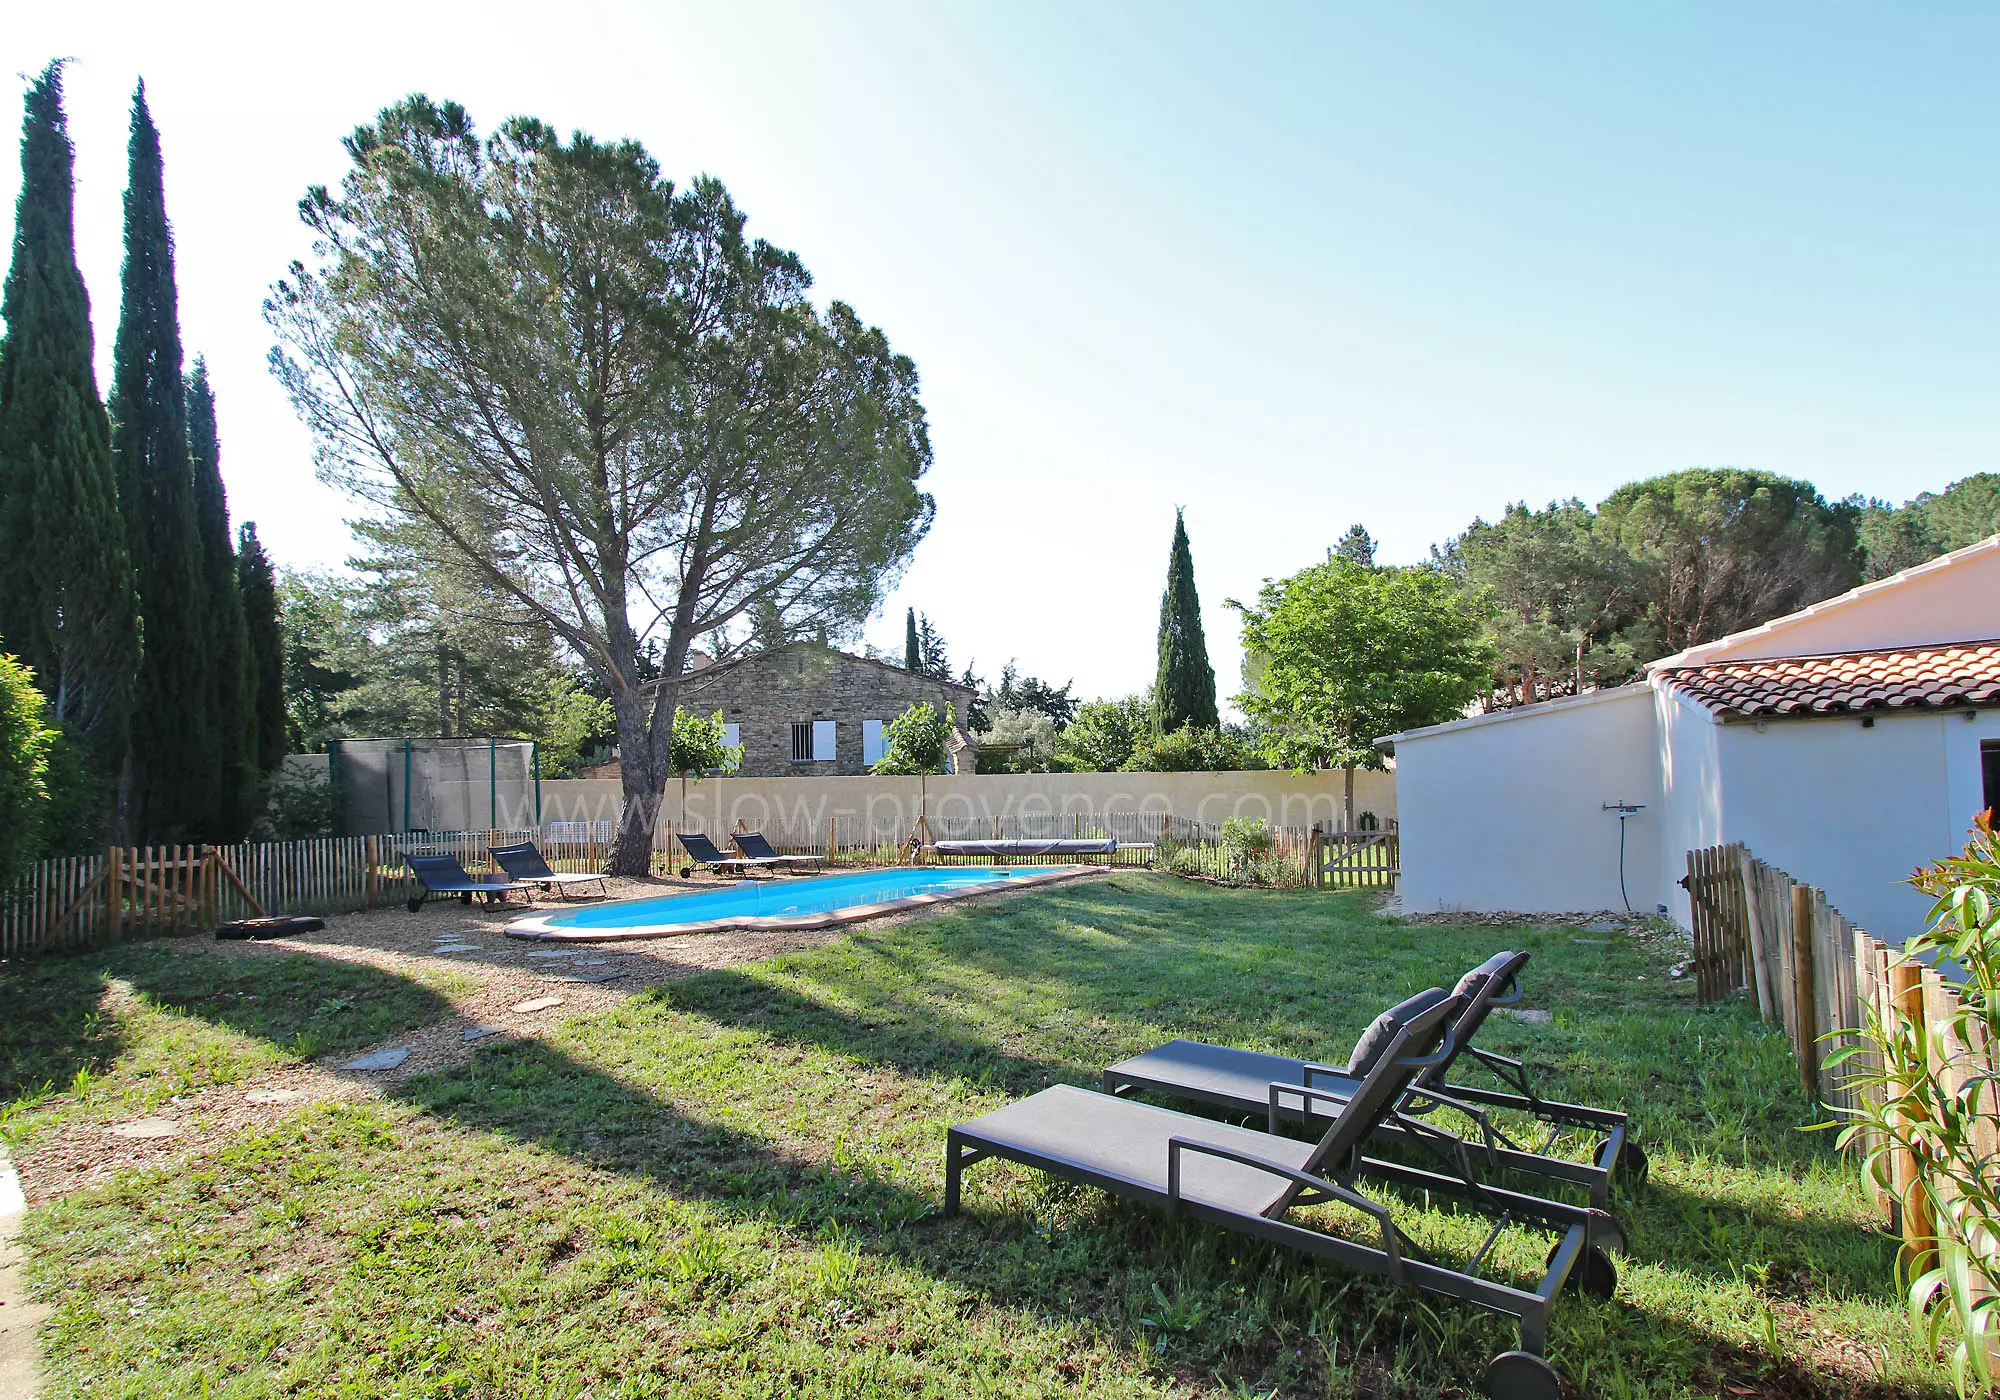 A large fenced garden and a heated pool